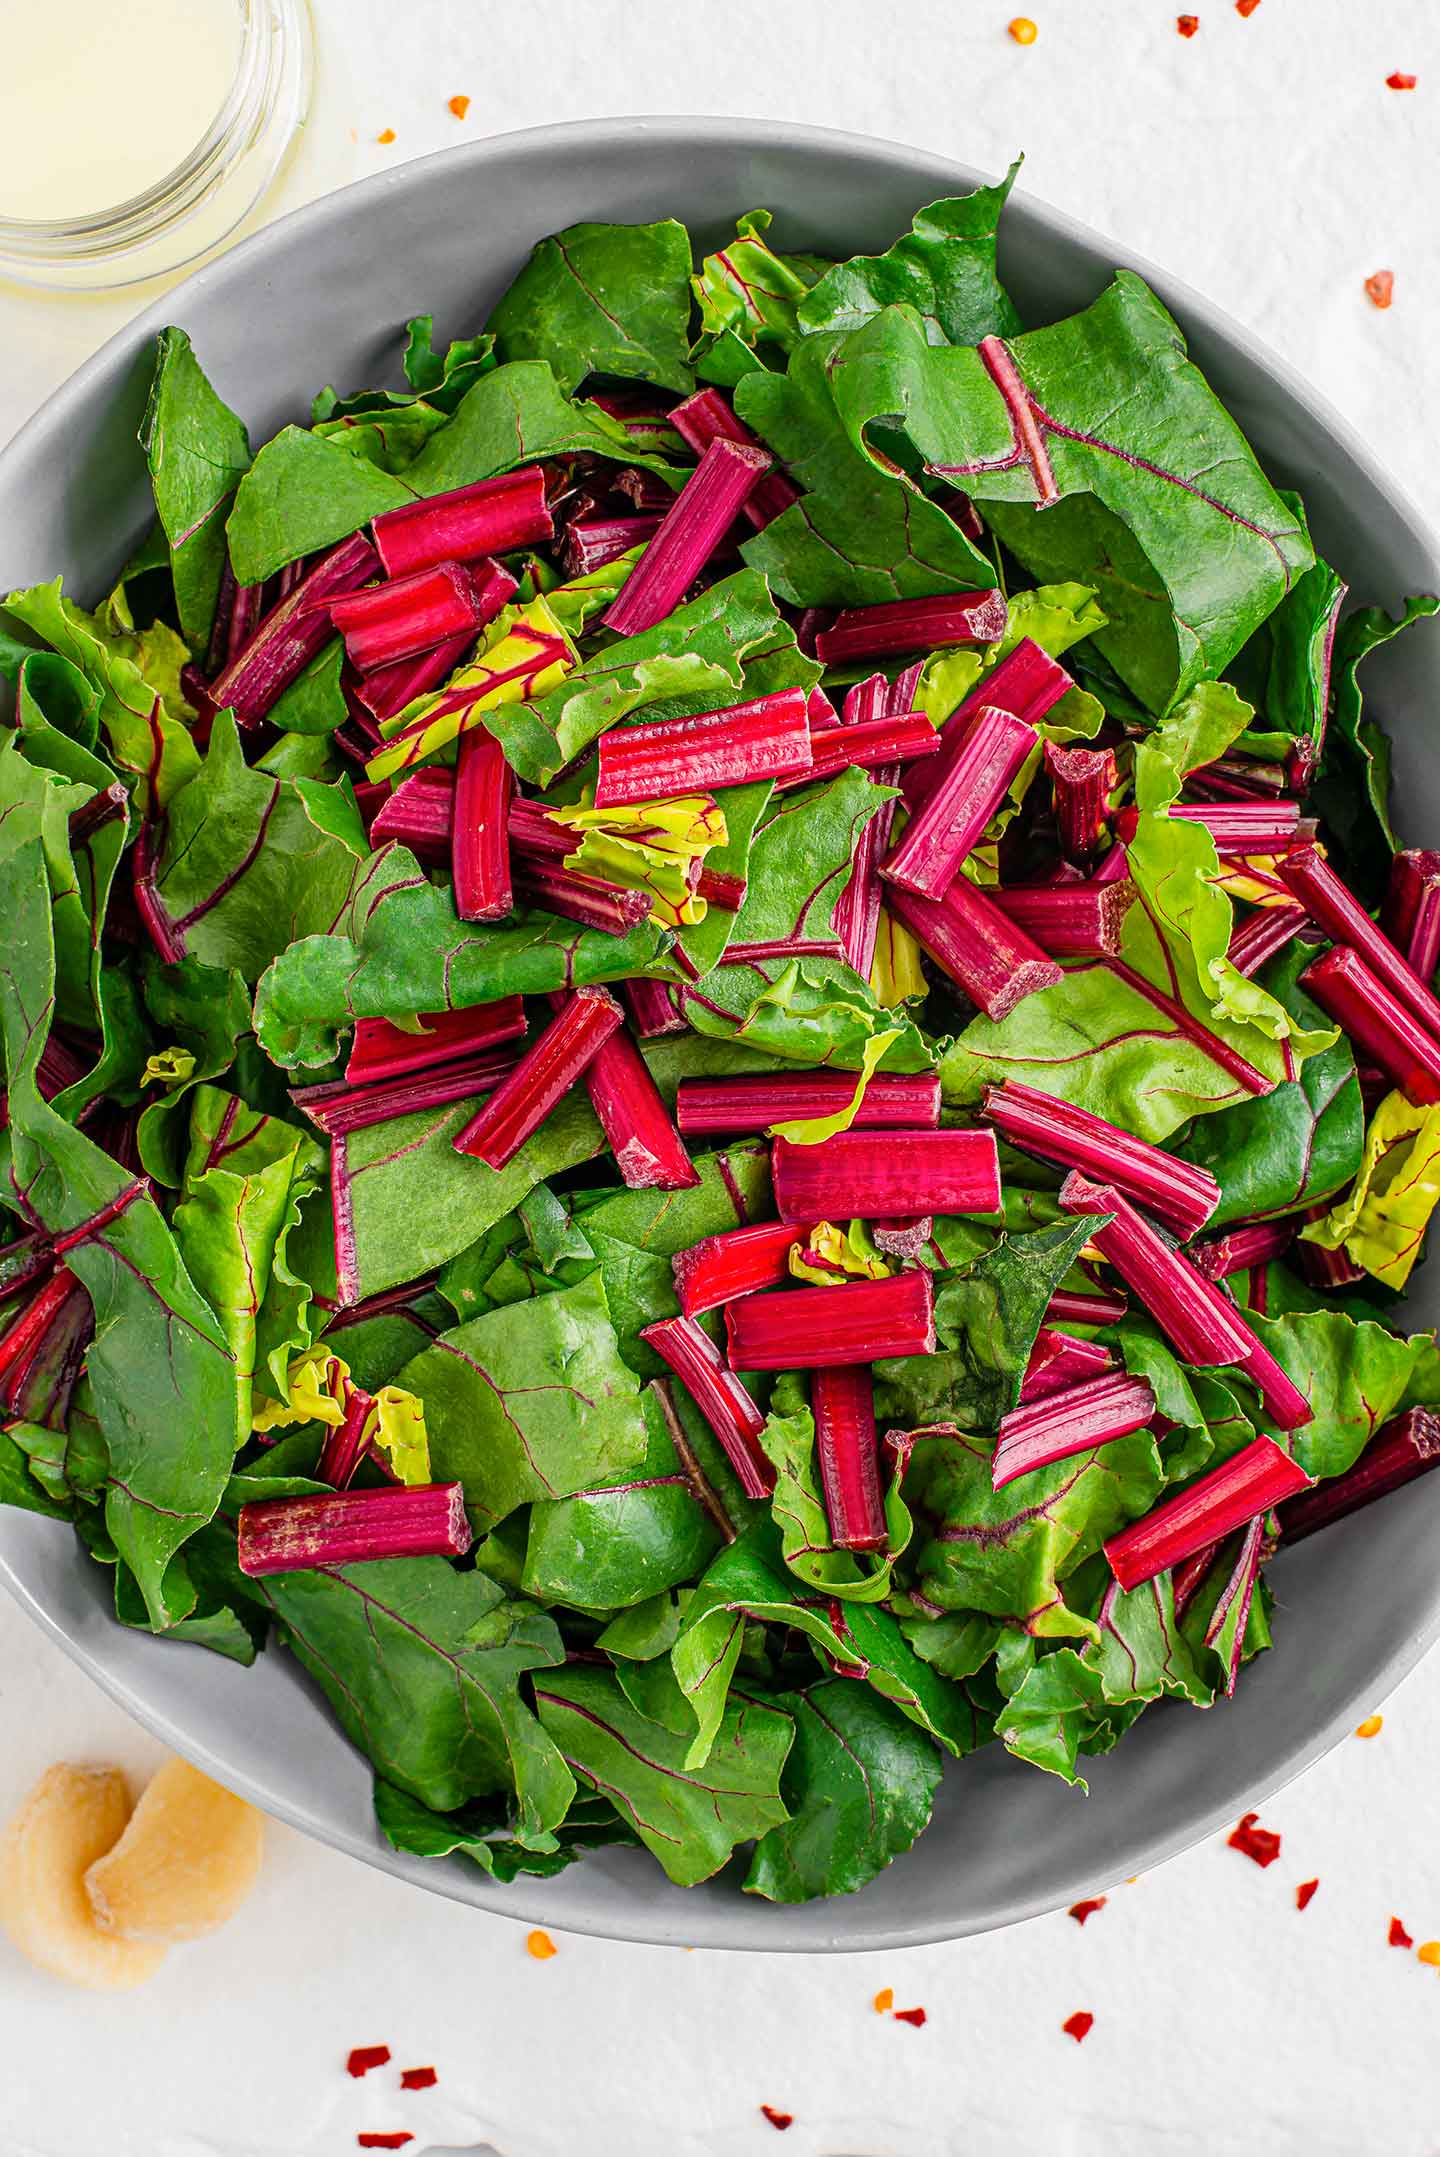 Top down view of raw, sliced beet greens in a large bowl. Lemon juice, garlic cloves, and chilli flakes surround the greens.